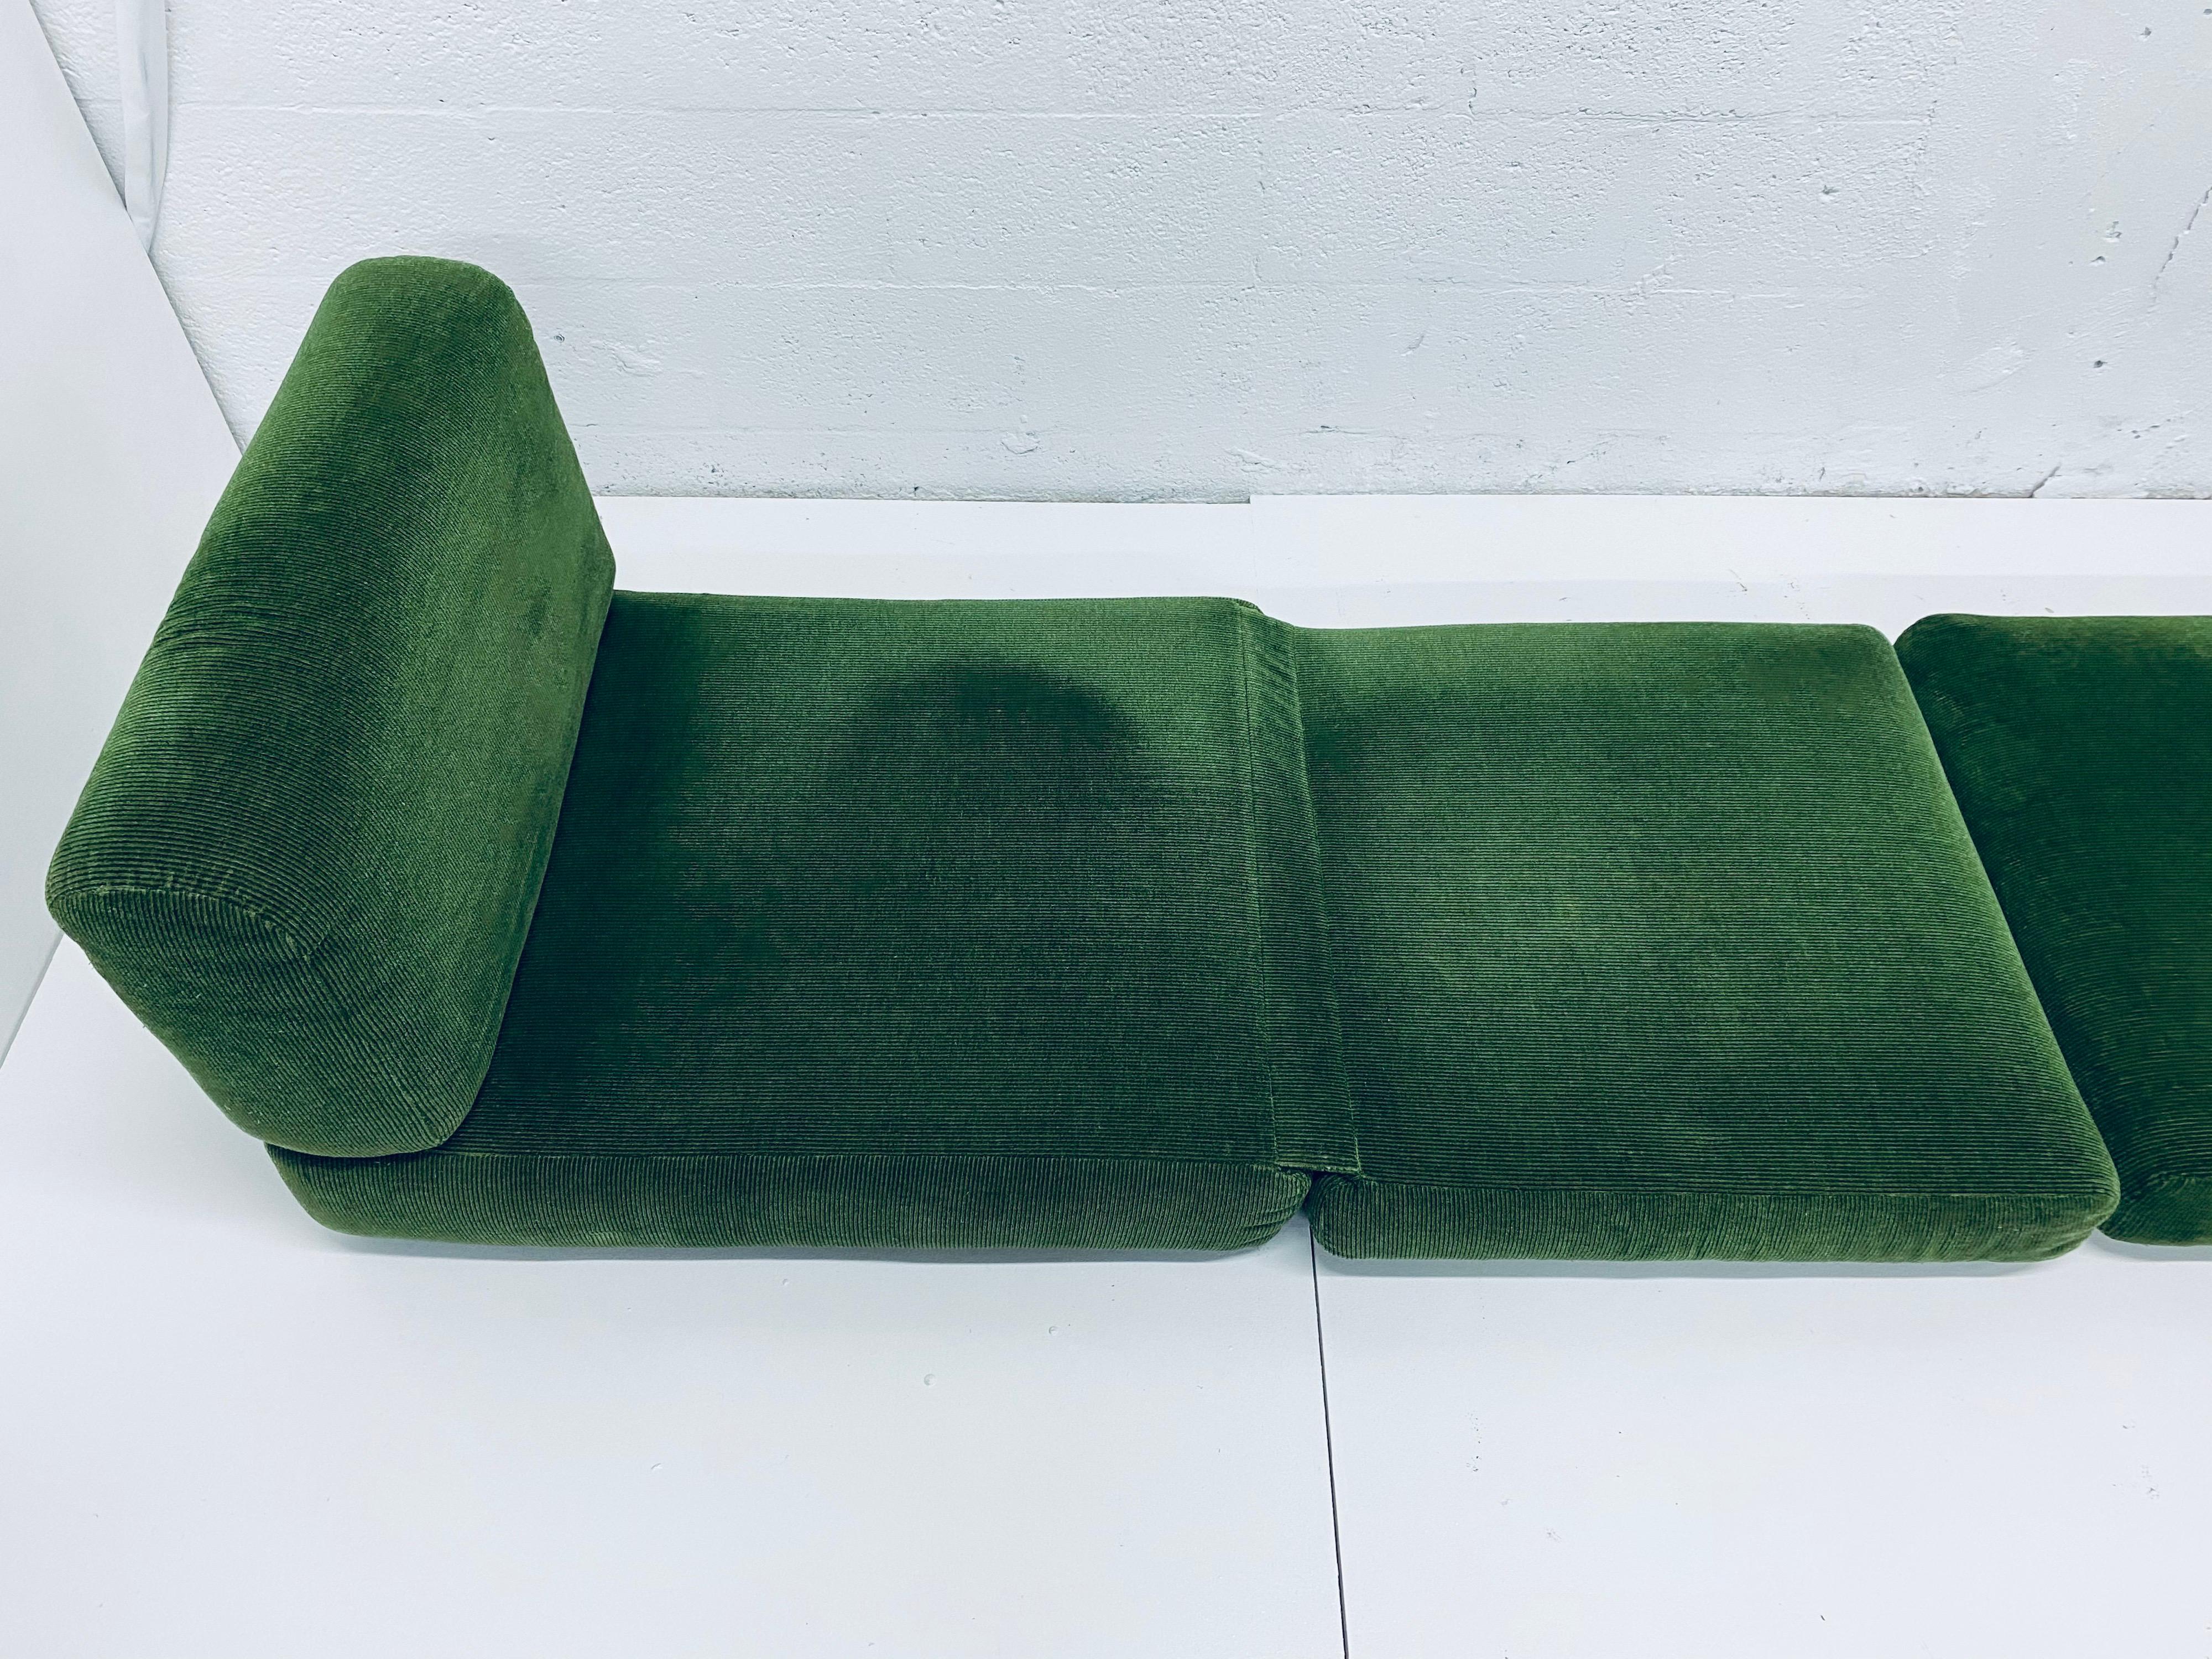 Unknown Pair of Midcentury Green Corduroy Upholstered Convertible Lounge Chair Daybeds